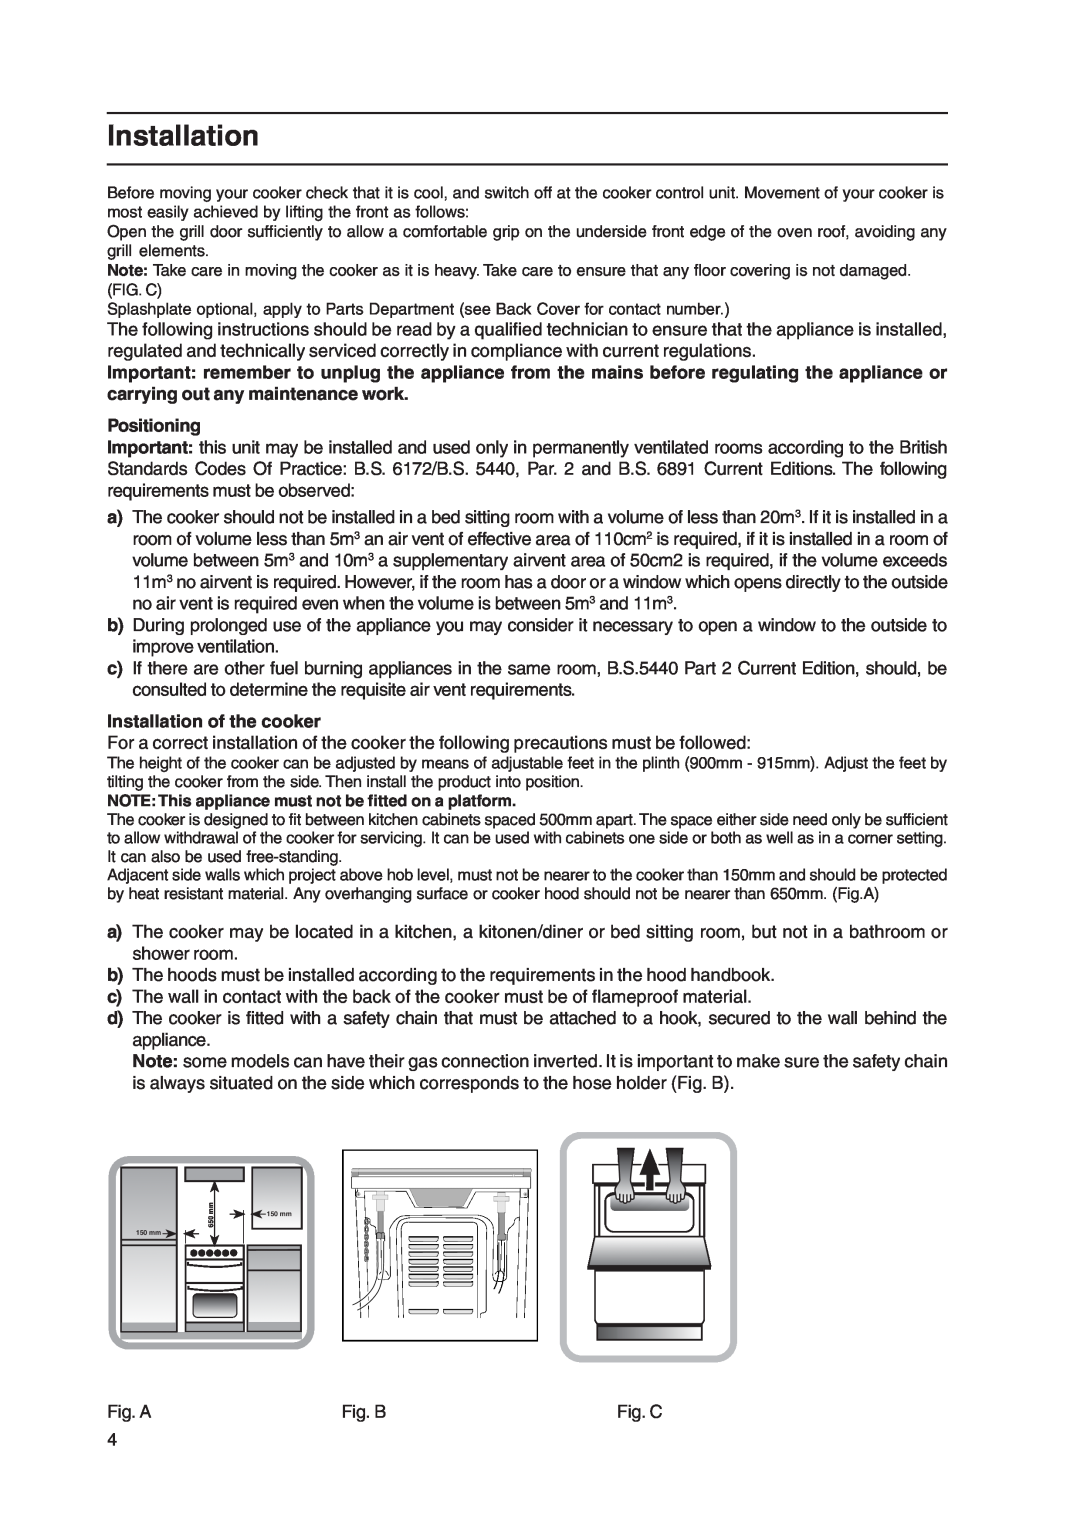 Indesit KD3G11/G manual Positioning, Installation of the cooker 